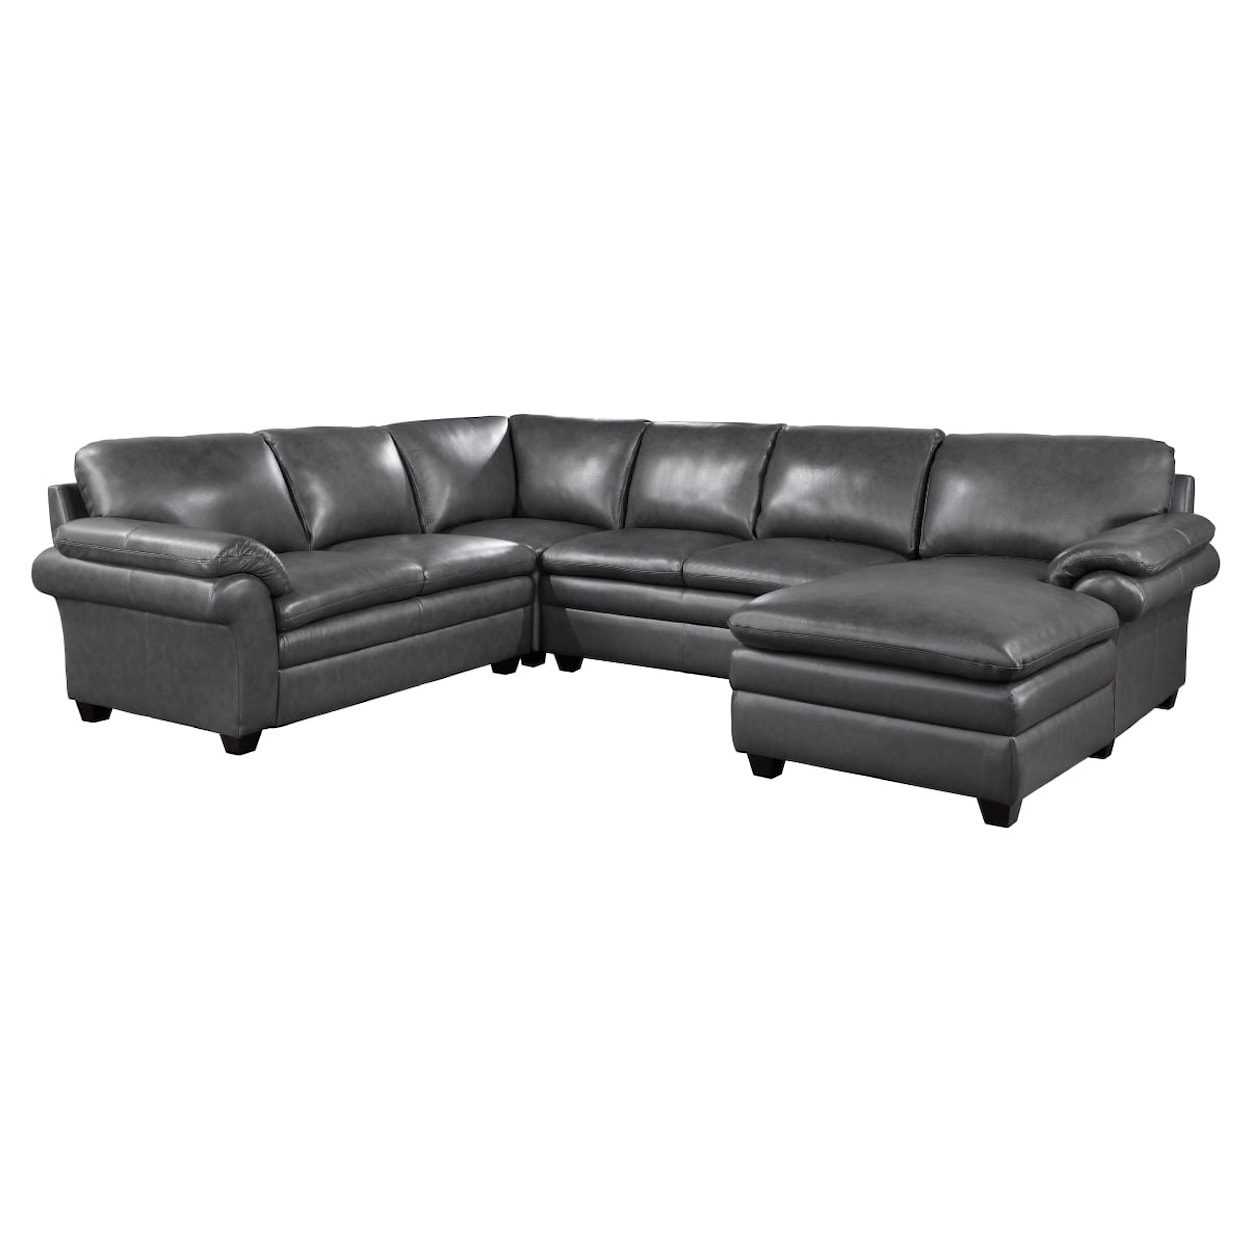 Homelegance Exton 4-Piece Sectional with Right Chaise